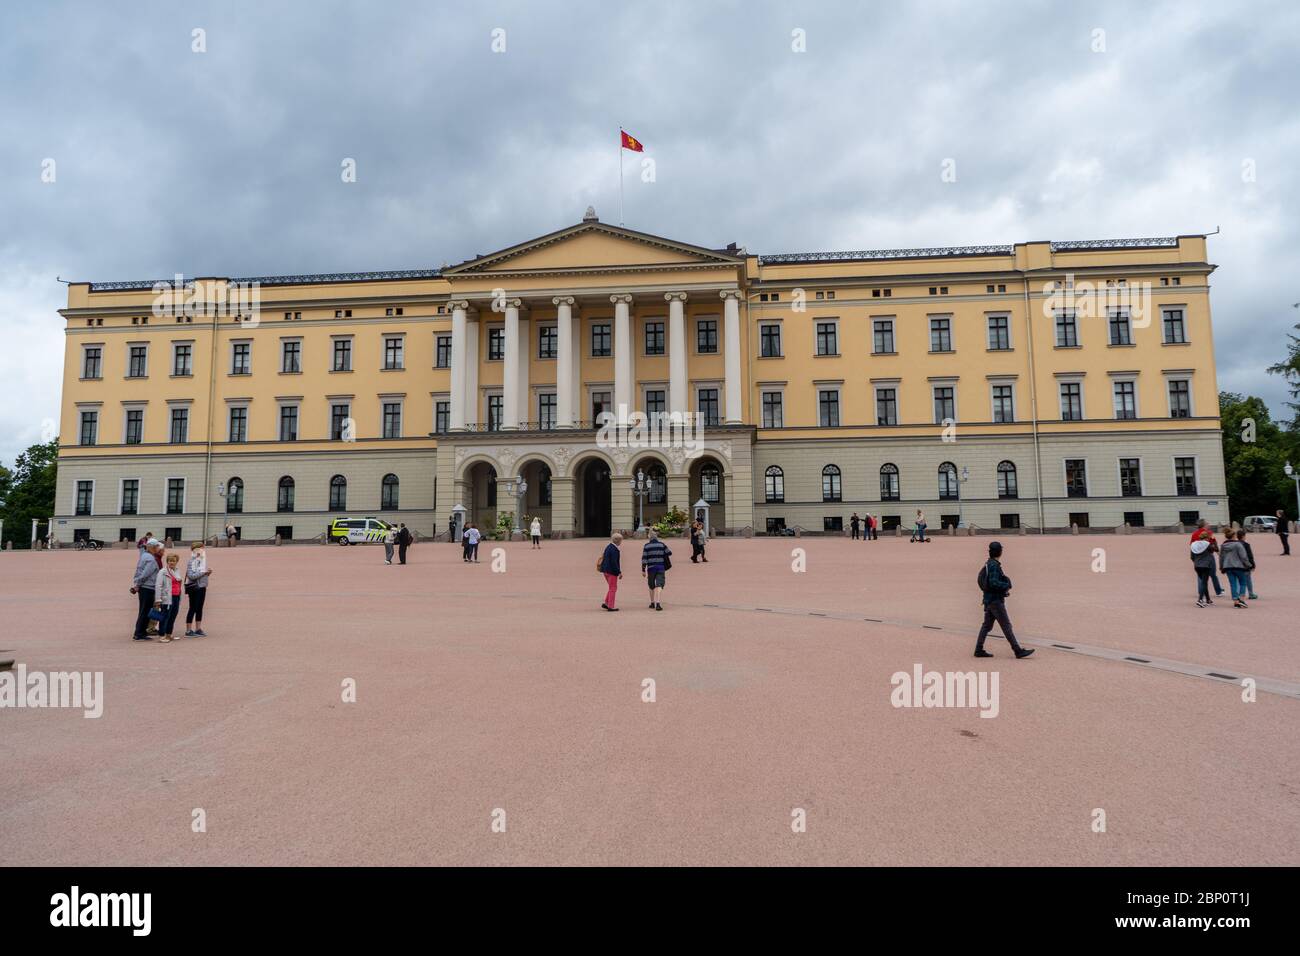 People walking around The Royal Palace of Oslo in Norway. August 2019 Stock Photo